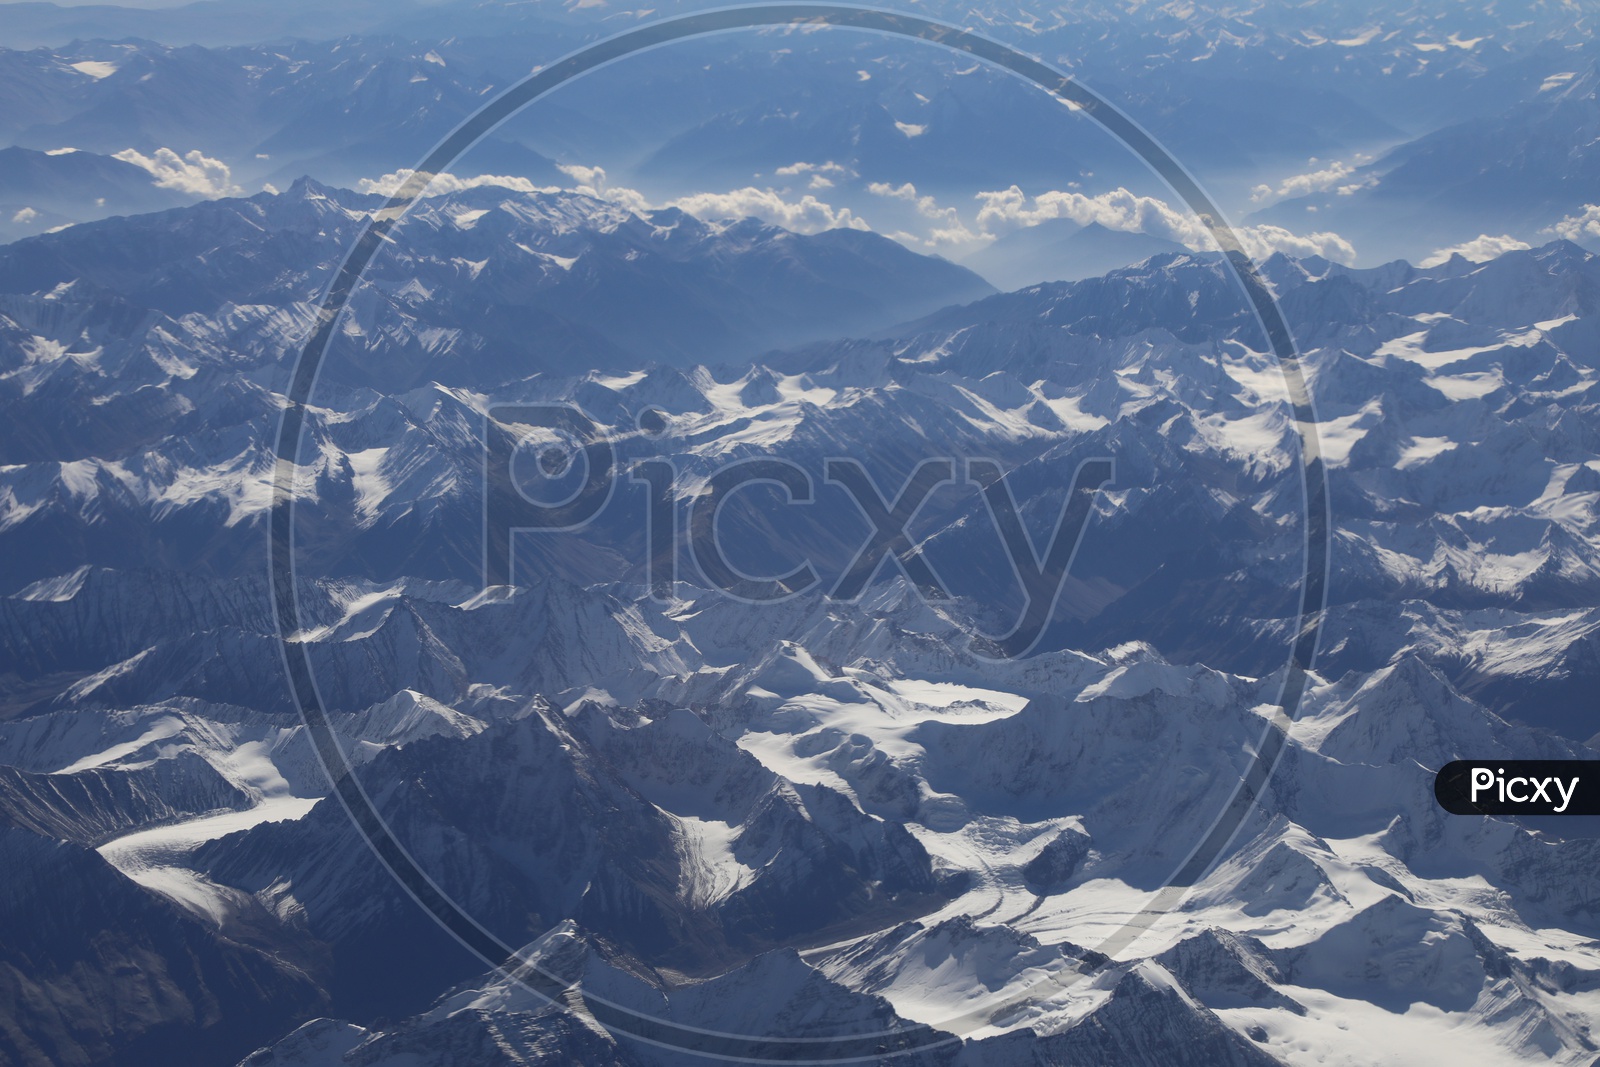 Beautiful Landscape of Snow Capped Mountains of Leh  from flight window / Leh mountains in Aerial View